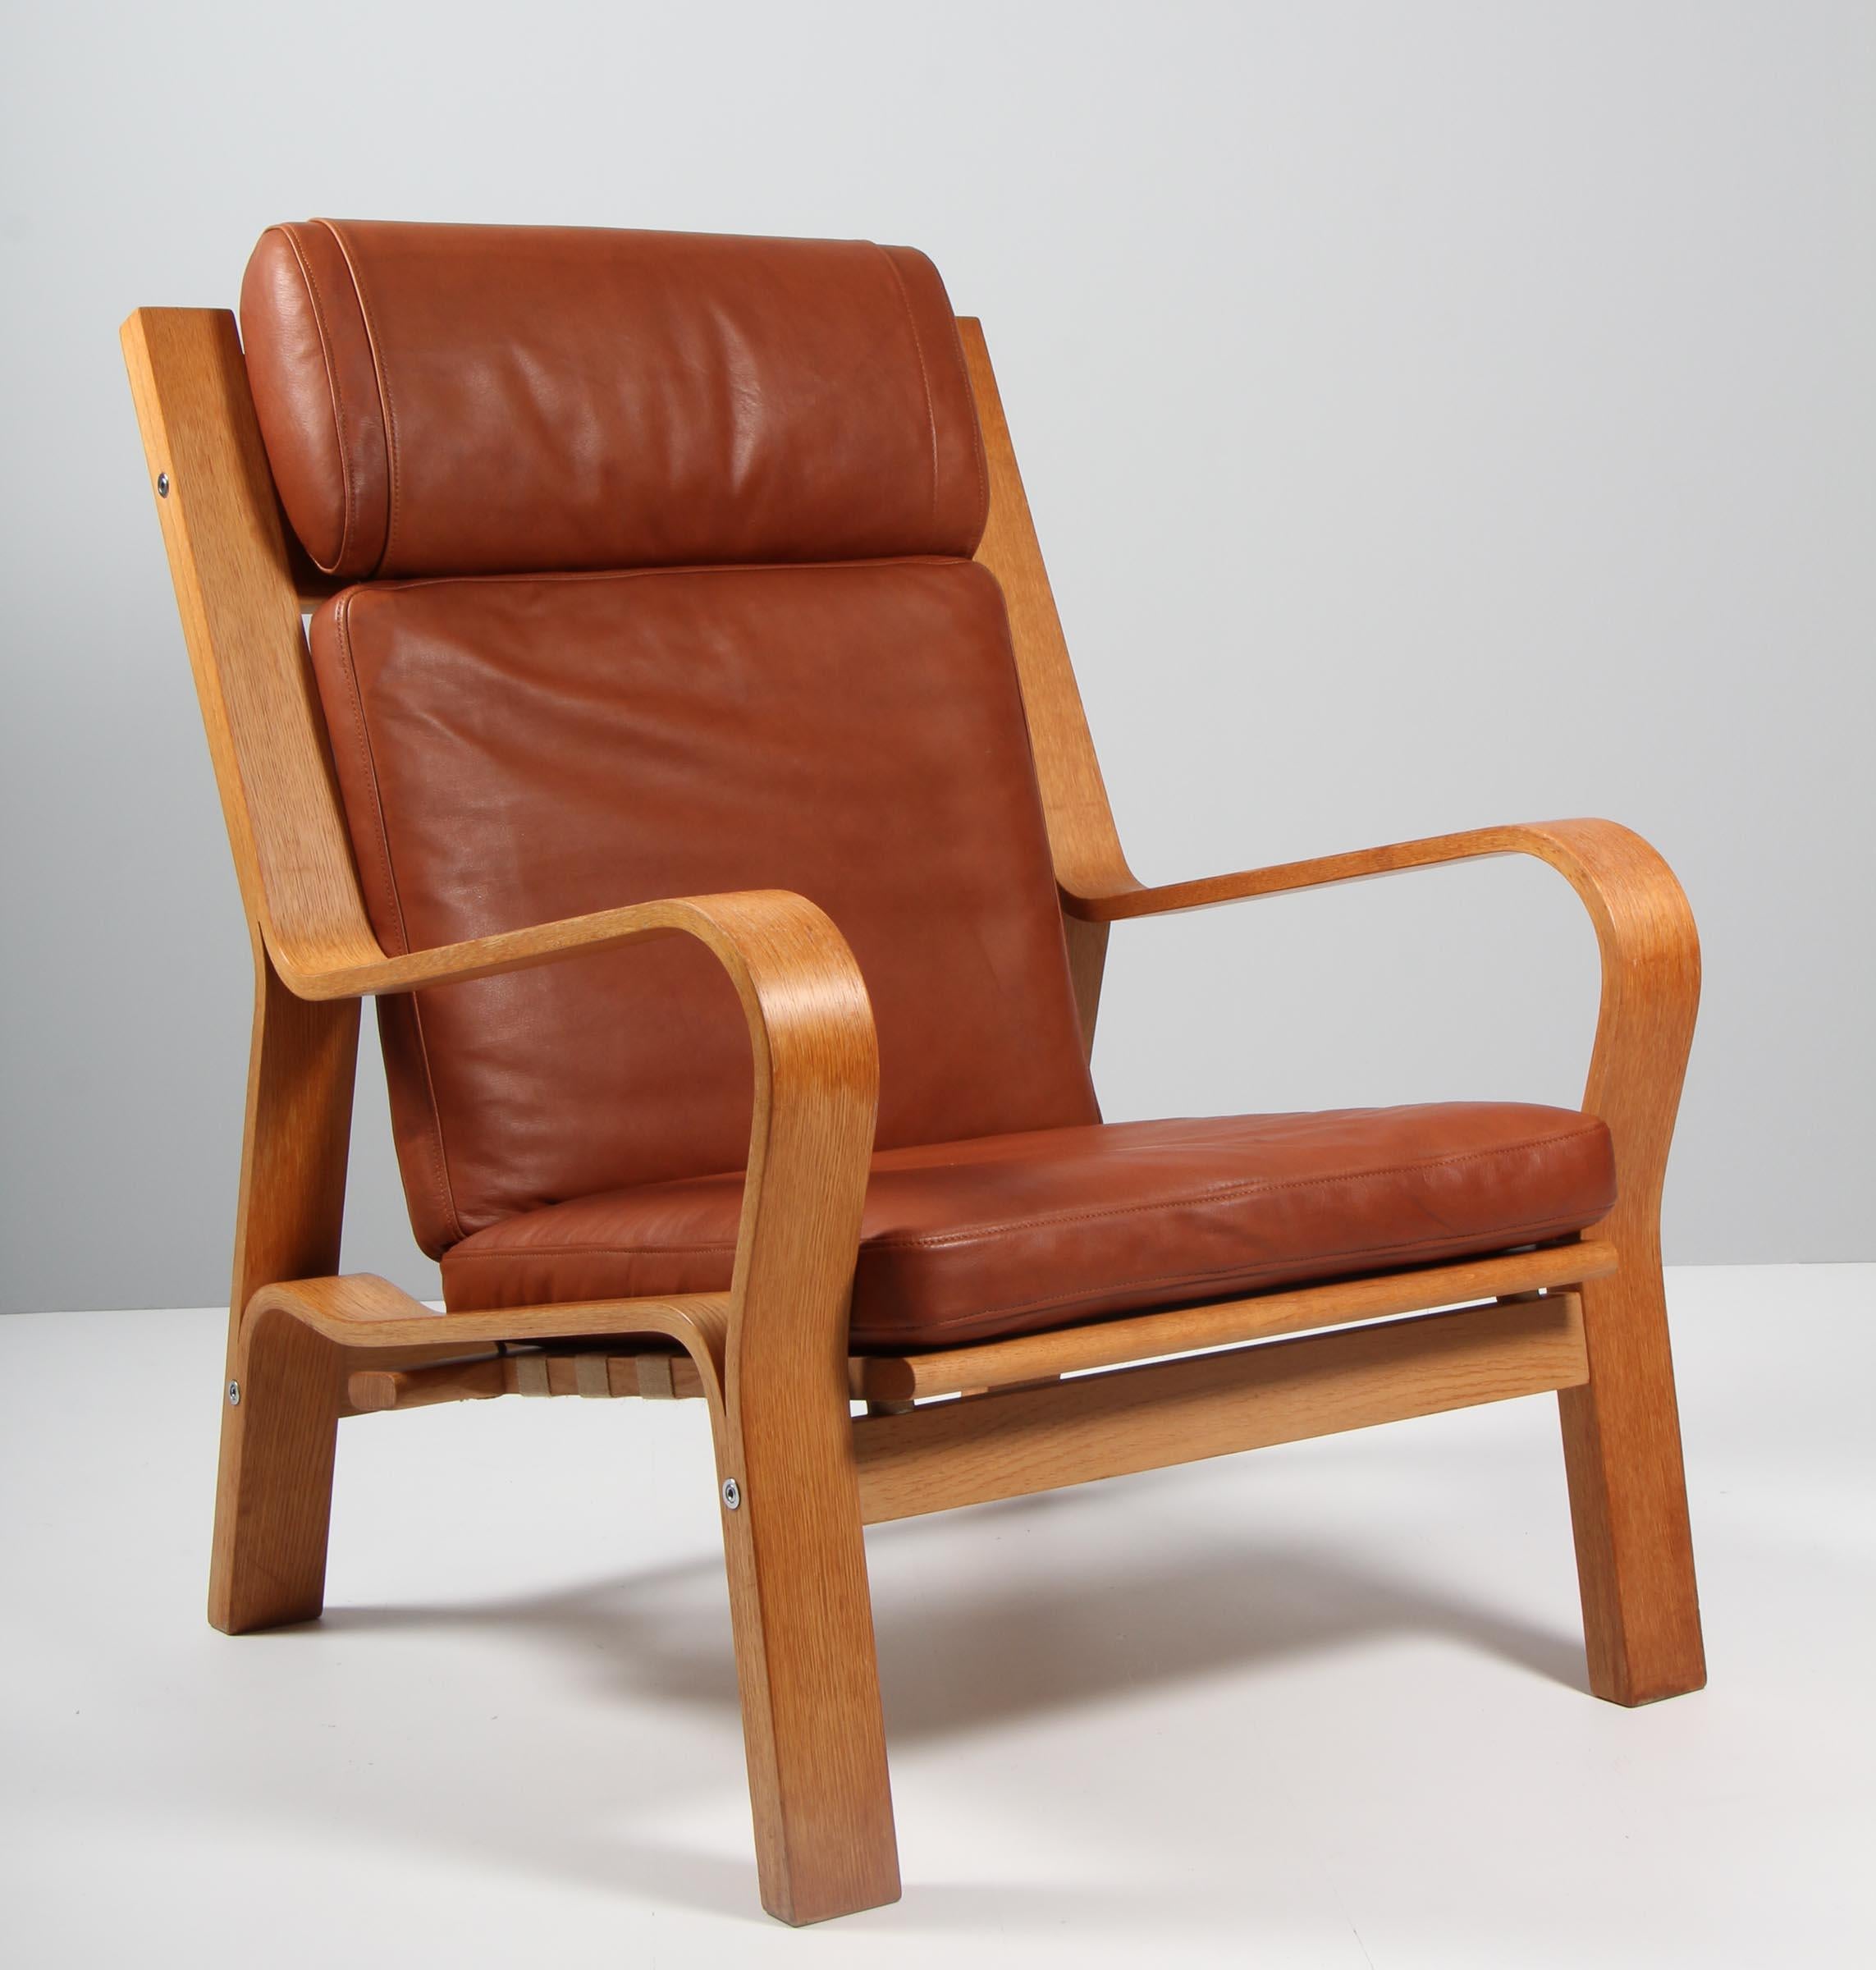 Hans J. Wegner, Lounge Chair, Model 671, Oak, Leather and Cotton Rope 1